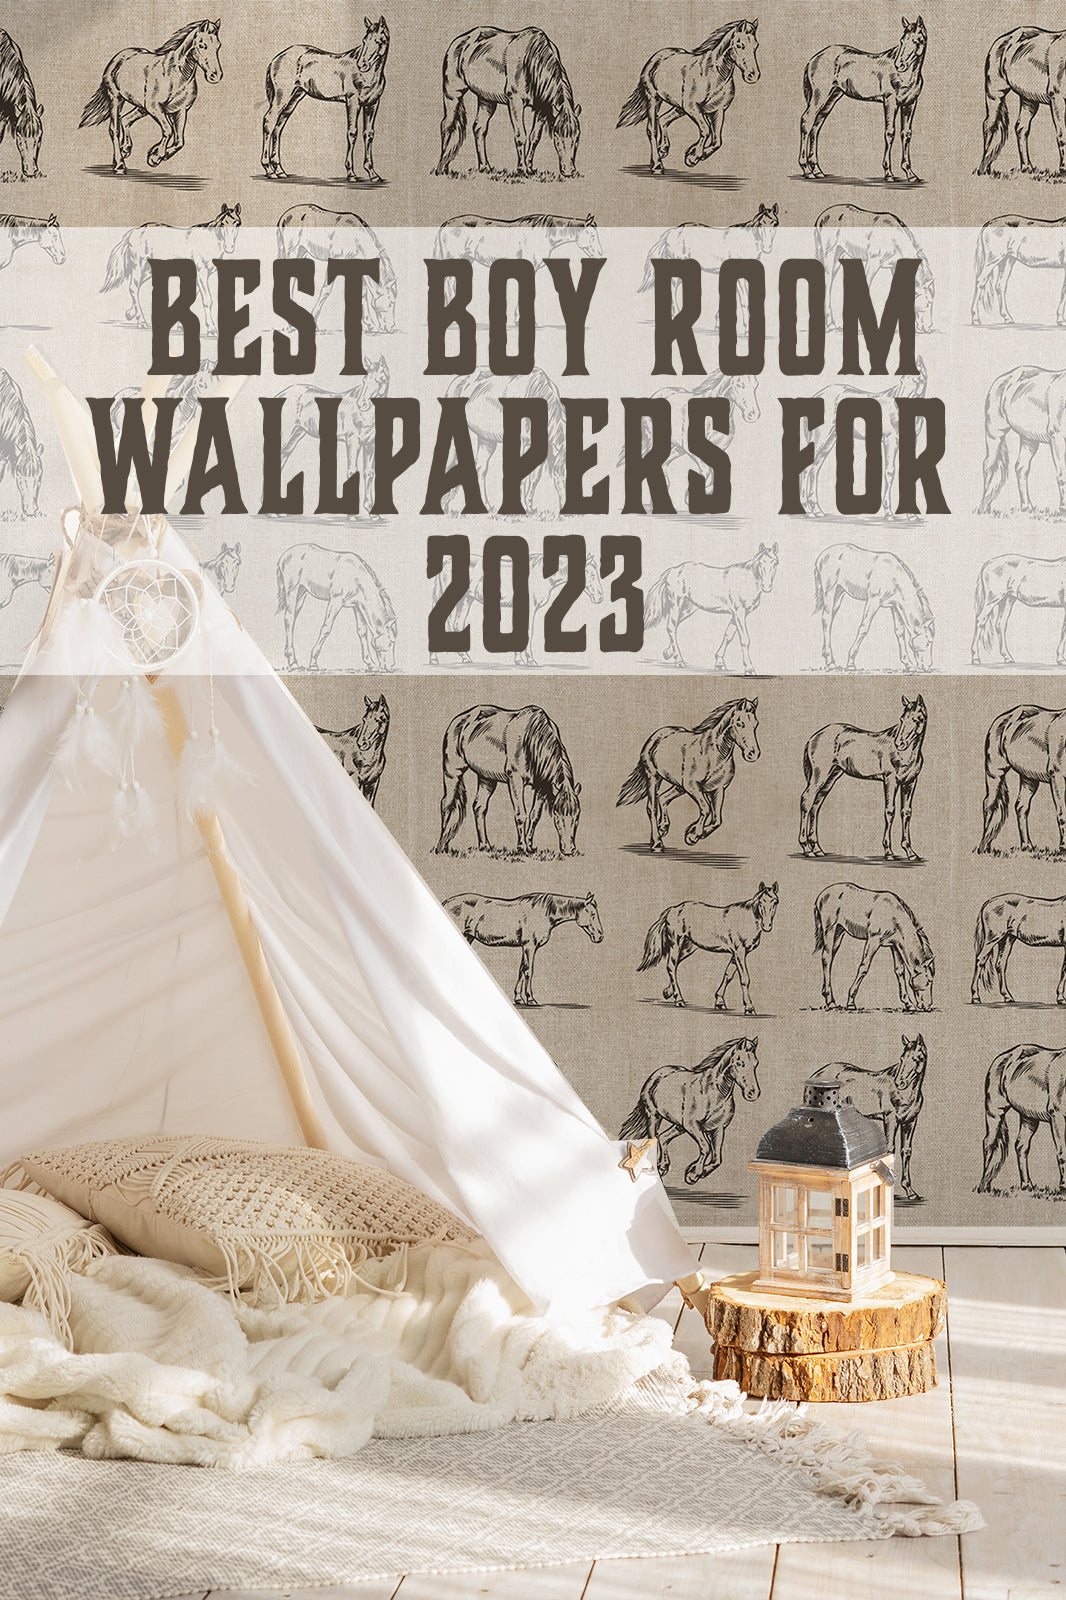 Best Boy Room Wallpapers for 2023